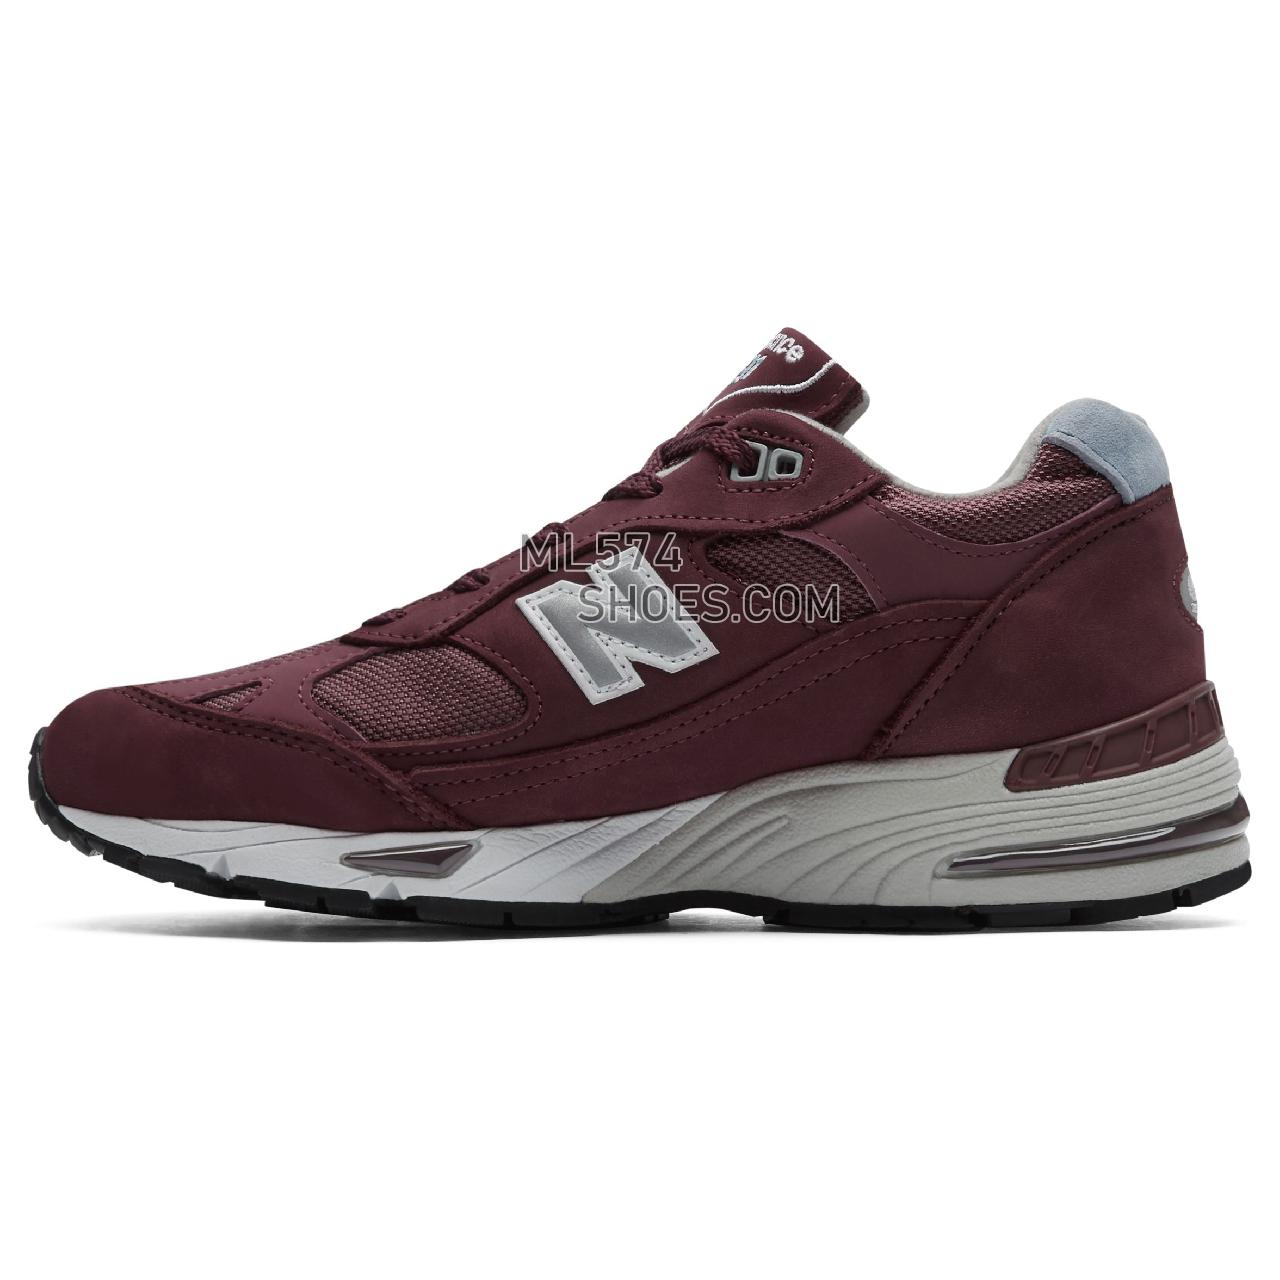 New Balance Made in UK 991 - Men's Made in UK 991 Classic - Burgundy with Blue - W991BBL